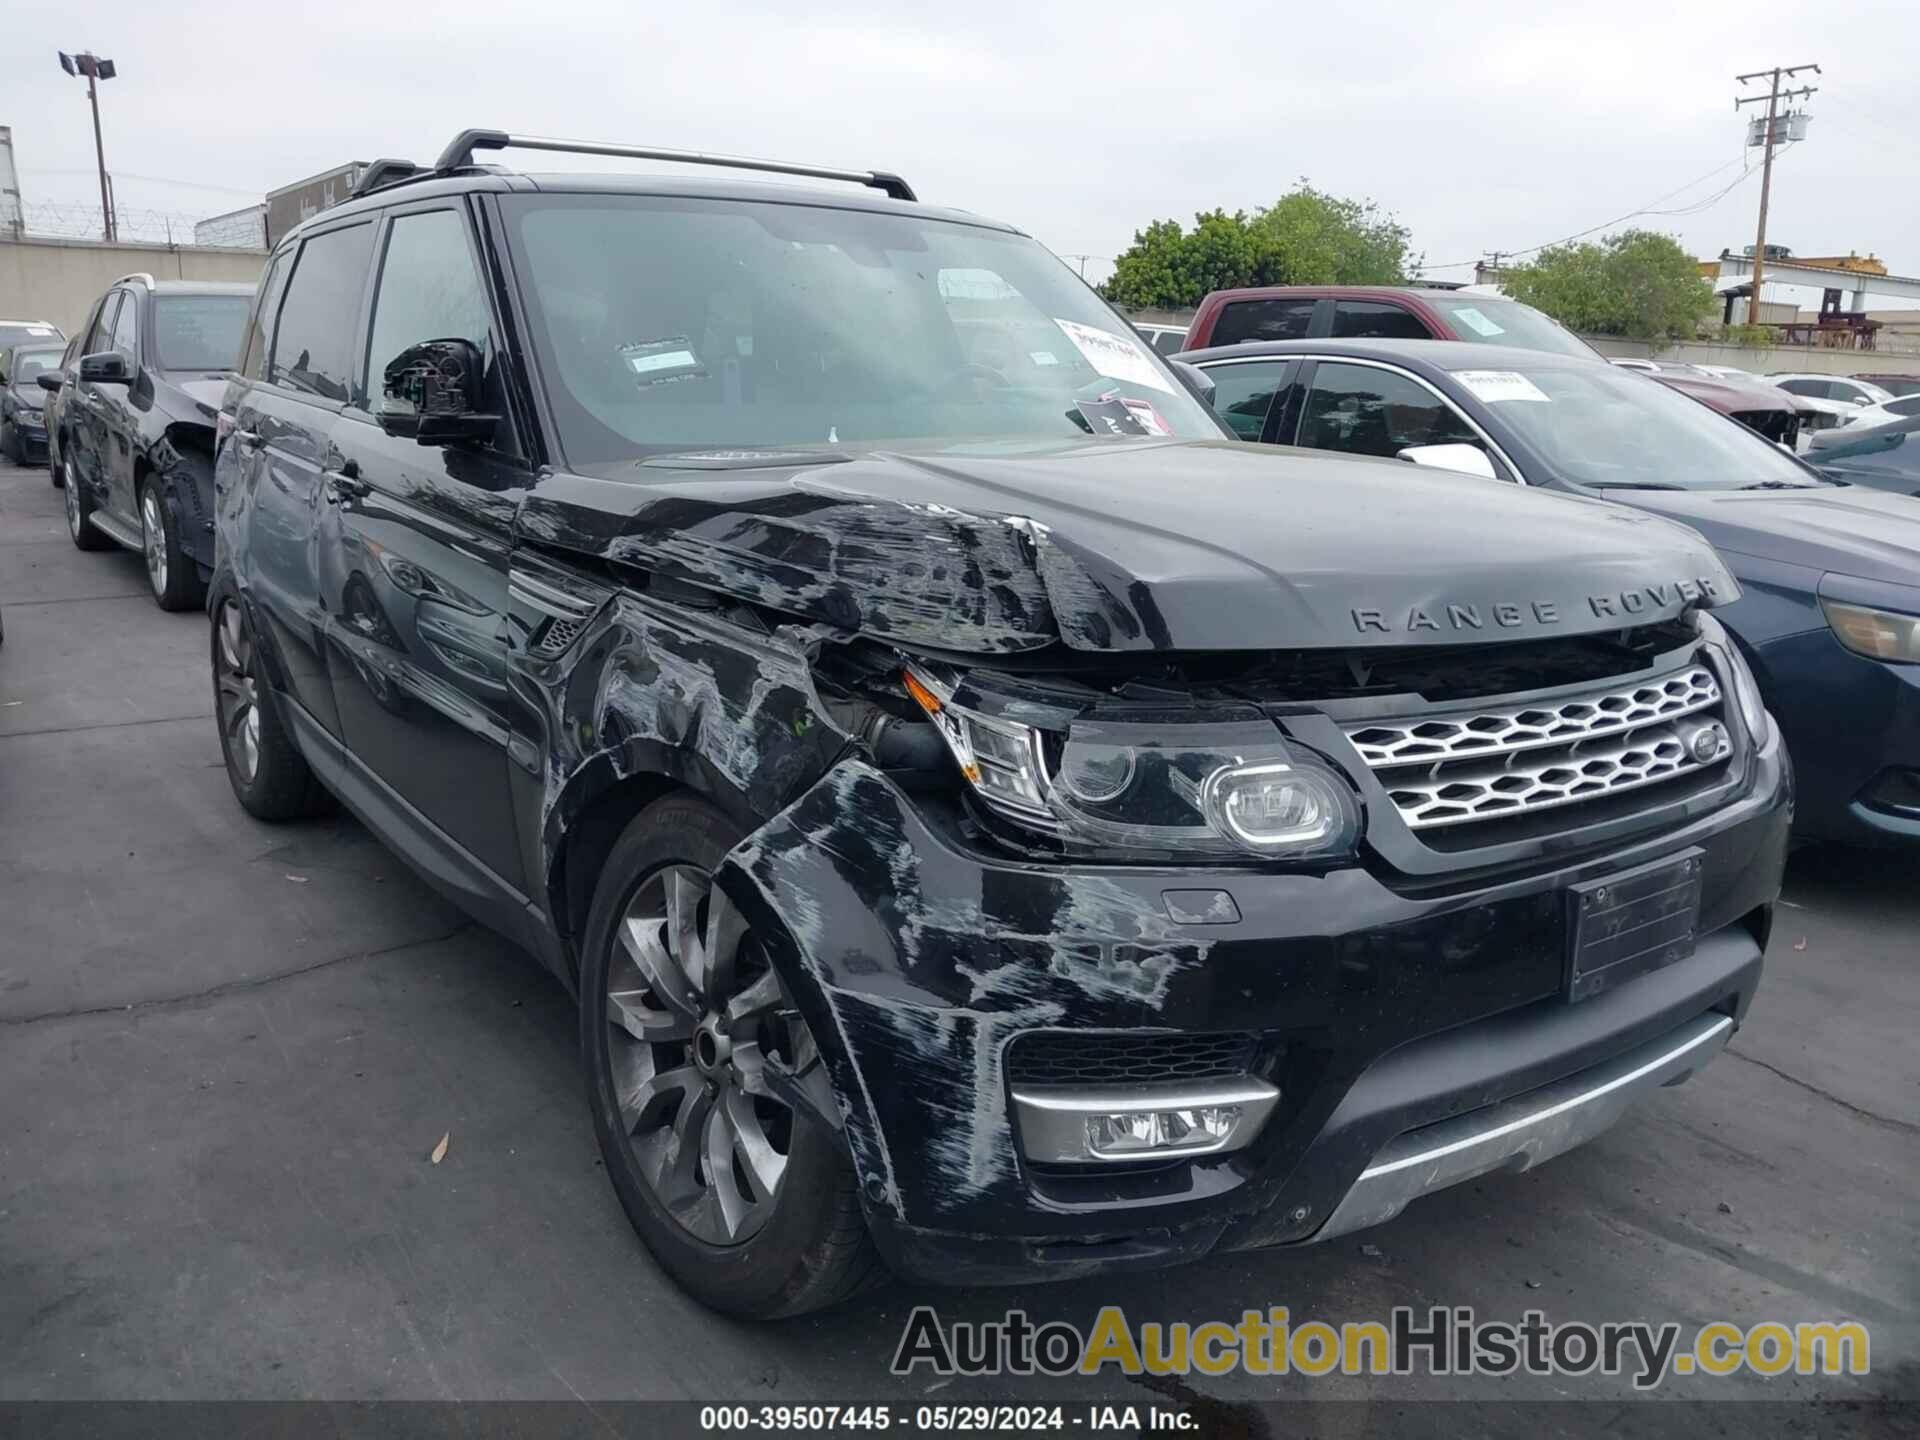 LAND ROVER RANGE ROVER SPORT 3.0L V6 SUPERCHARGED HSE, SALWR2WFXEA339267